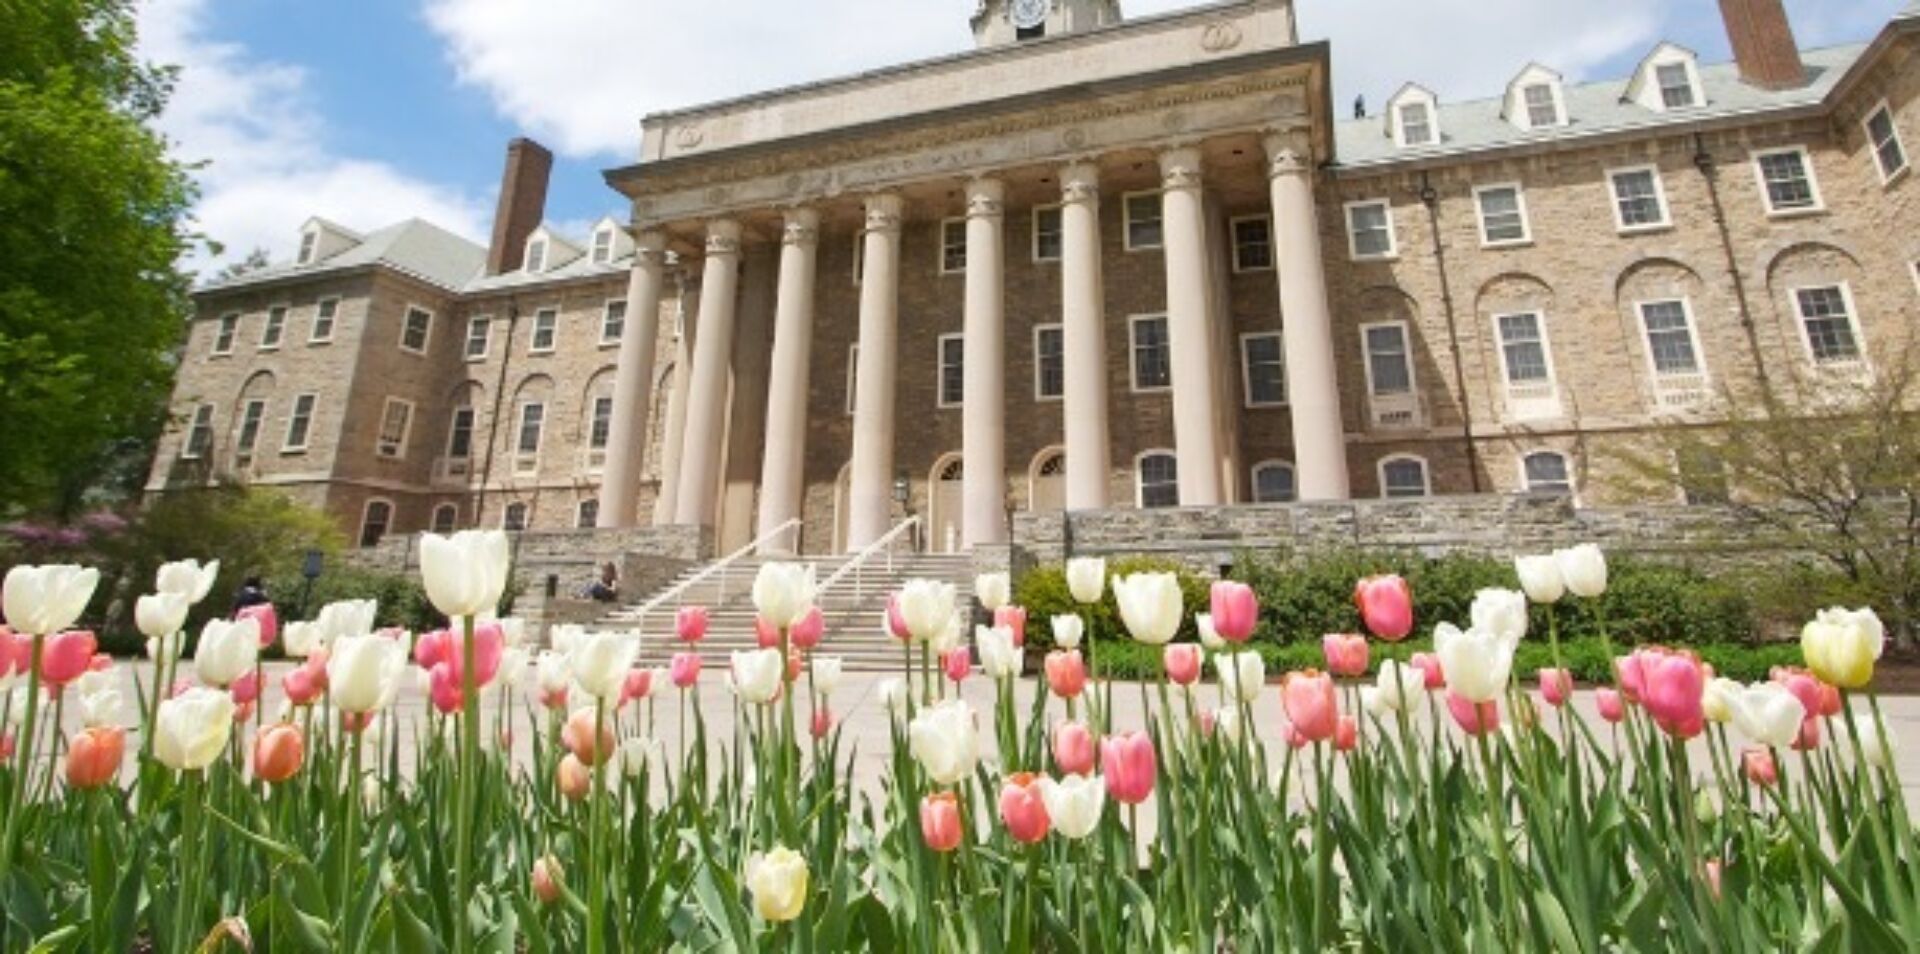 Pink and white tulips in bloom in front of Old Main at the Penn State University Park campus.